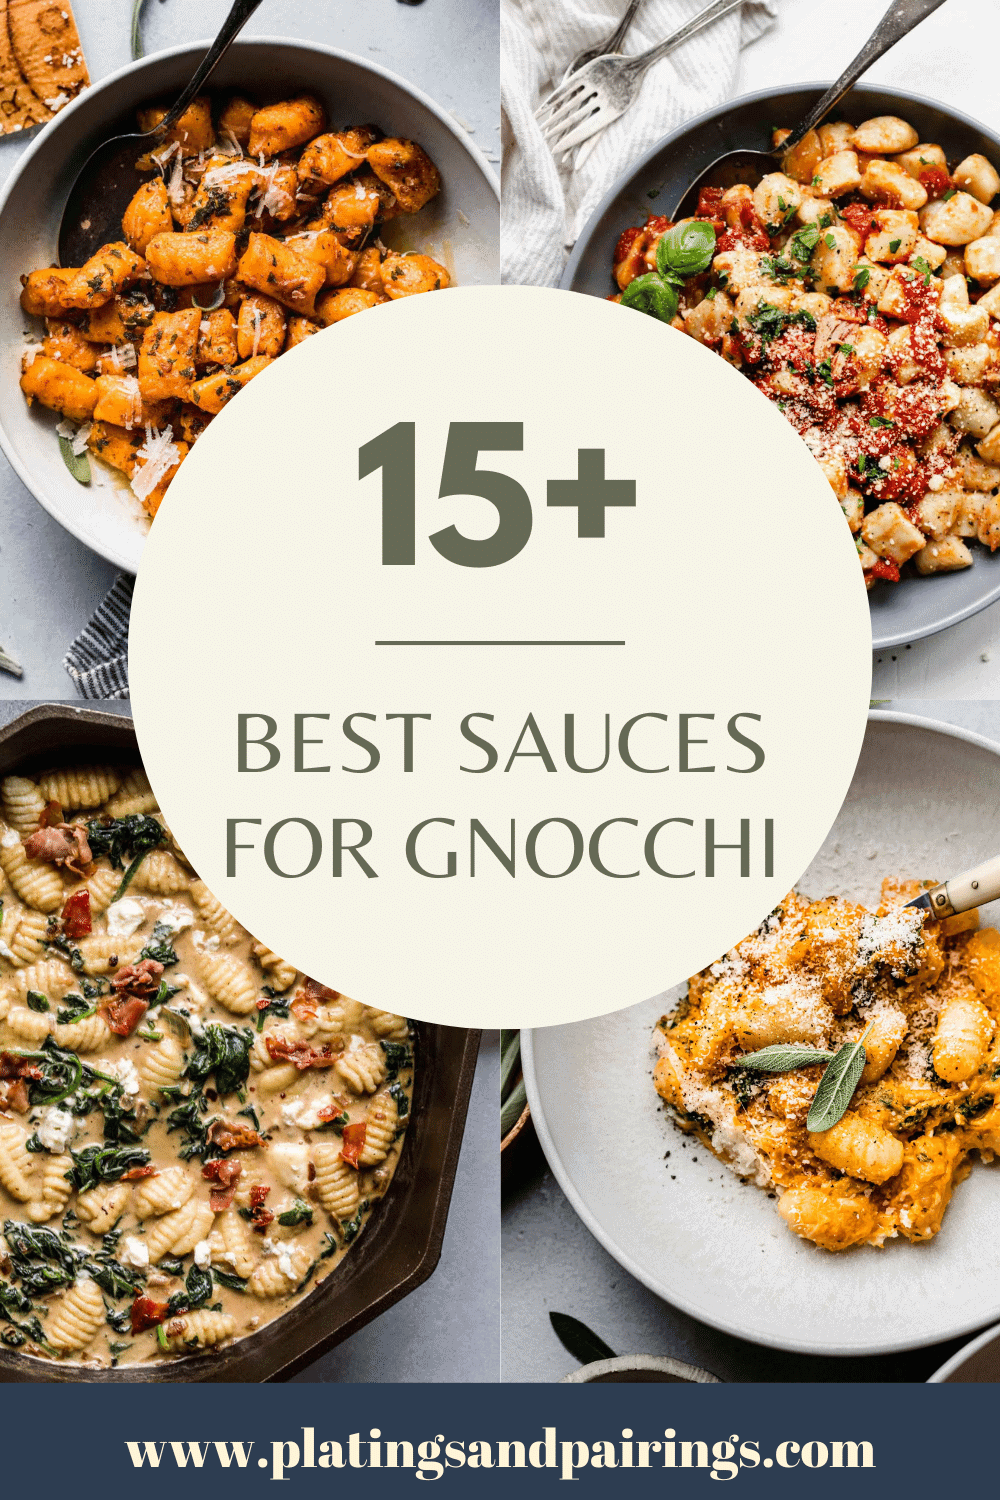 Collage of gnocchi dishes with text overlay - best sauces for gnocchi.